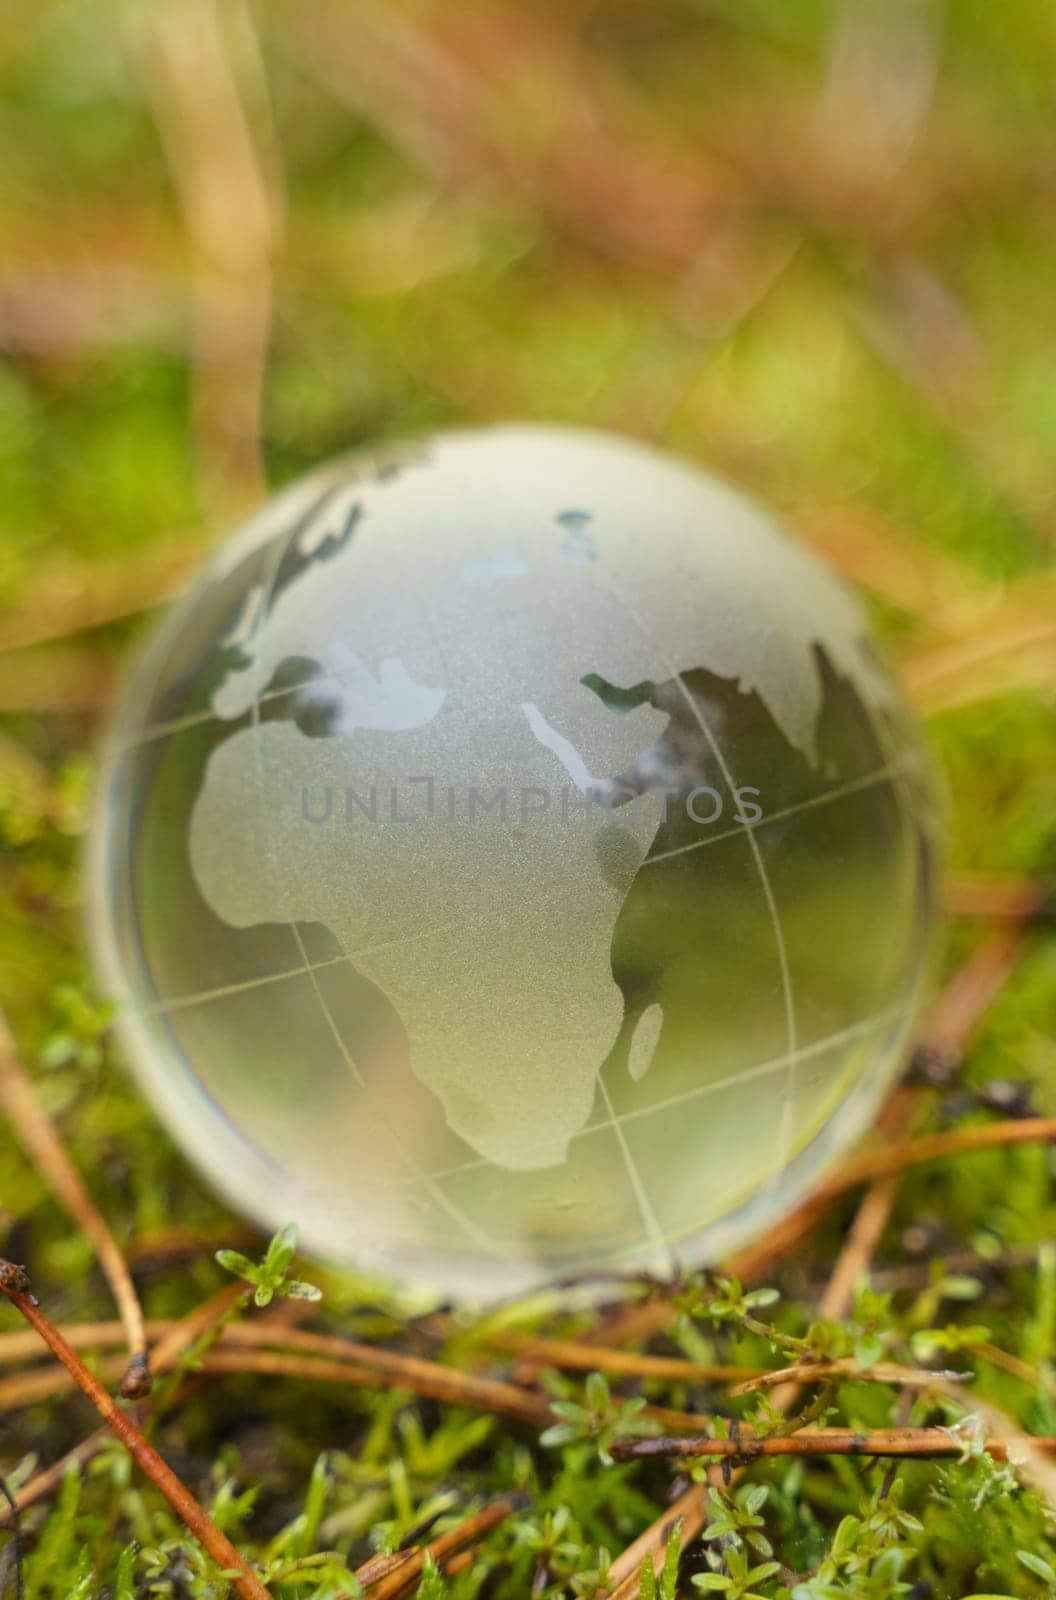 Ecology and planet concept. There is a glass globe on the green moss.